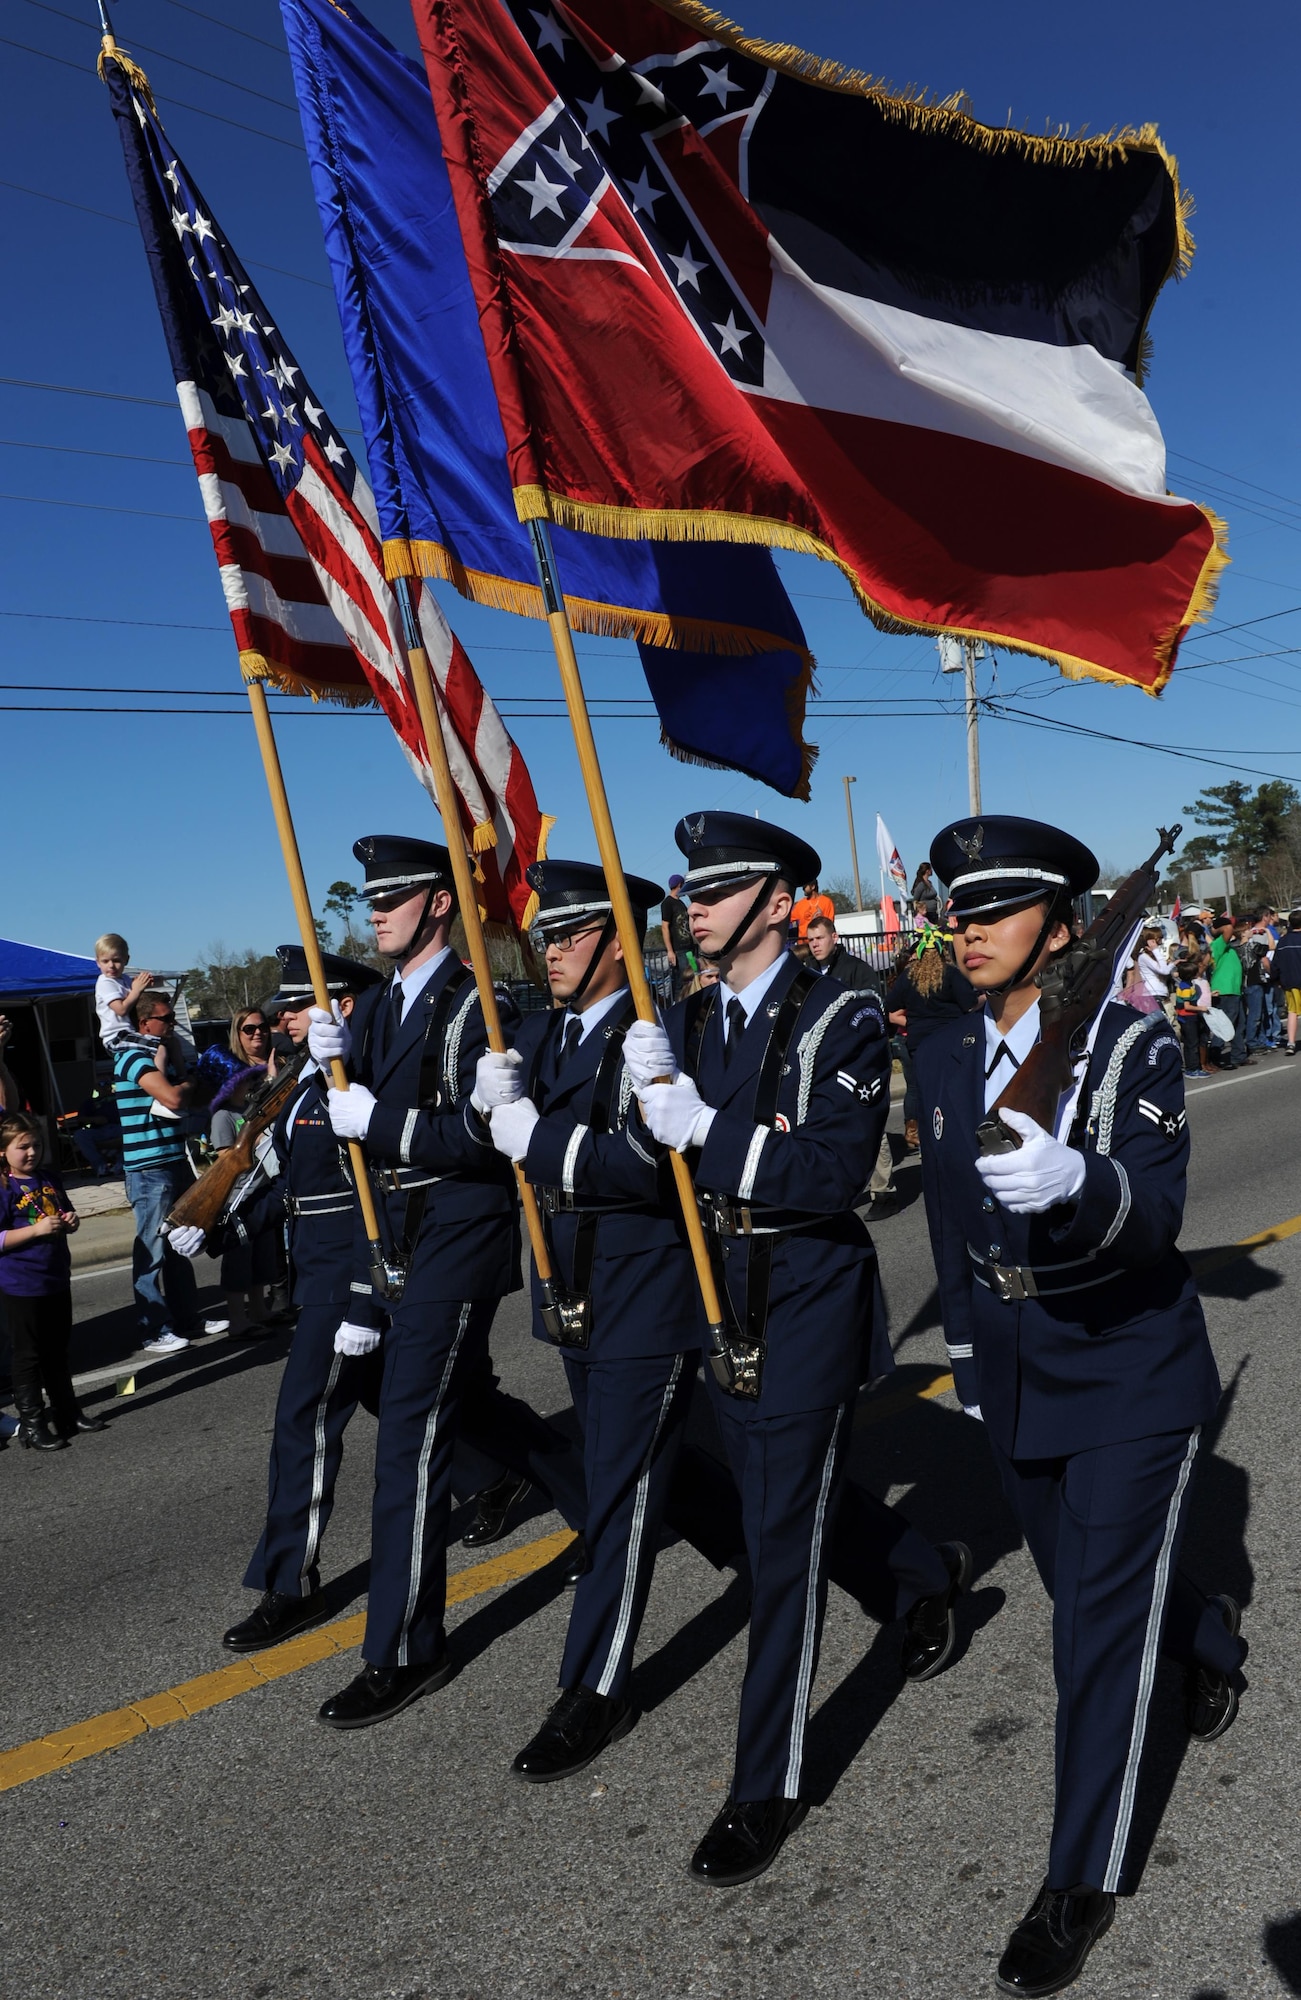 Members of the Keesler Air Force Base Honor Guard lead the North Bay Area Mardi Gras Parade Feb. 7, 2016, St. Martin, Miss. Every Mardi Gras season, Keesler participates in local parades to be involved with the community. (U.S. Air Force photo by Kemberly Groue)